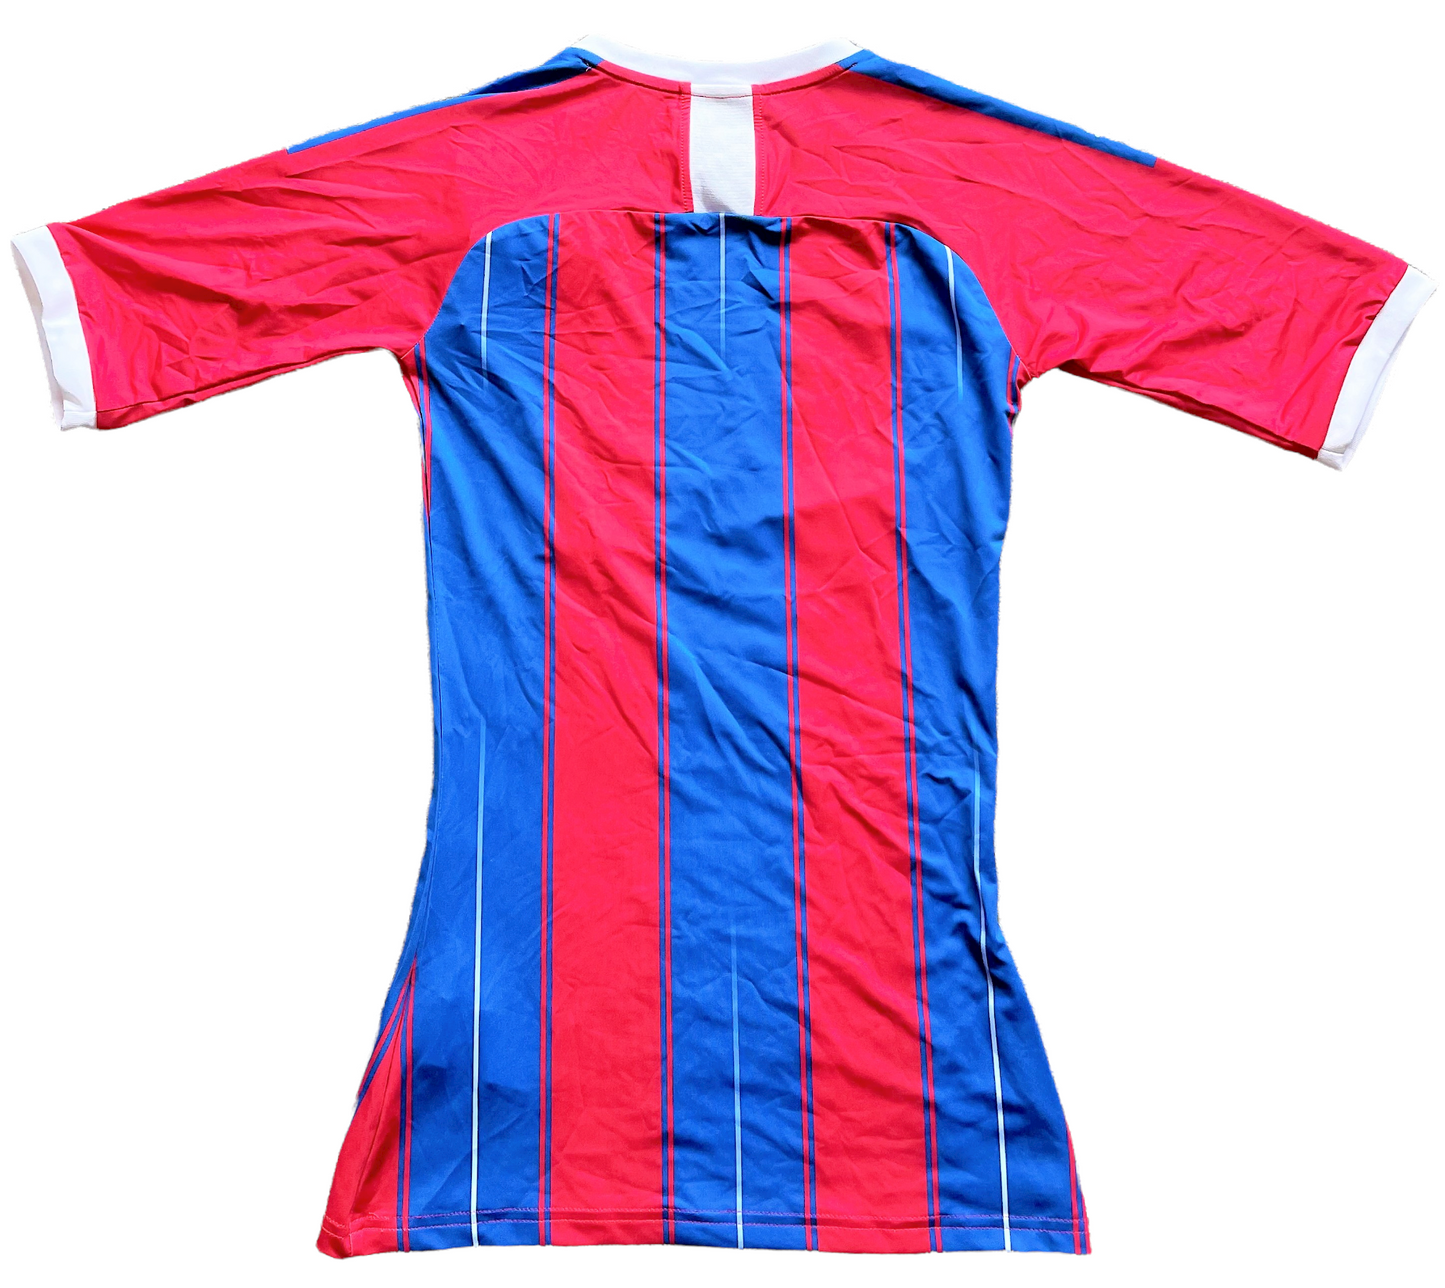 Crystal Palace 2019 Home Shirt (excellent) Adults Small. Height 21.5 inches